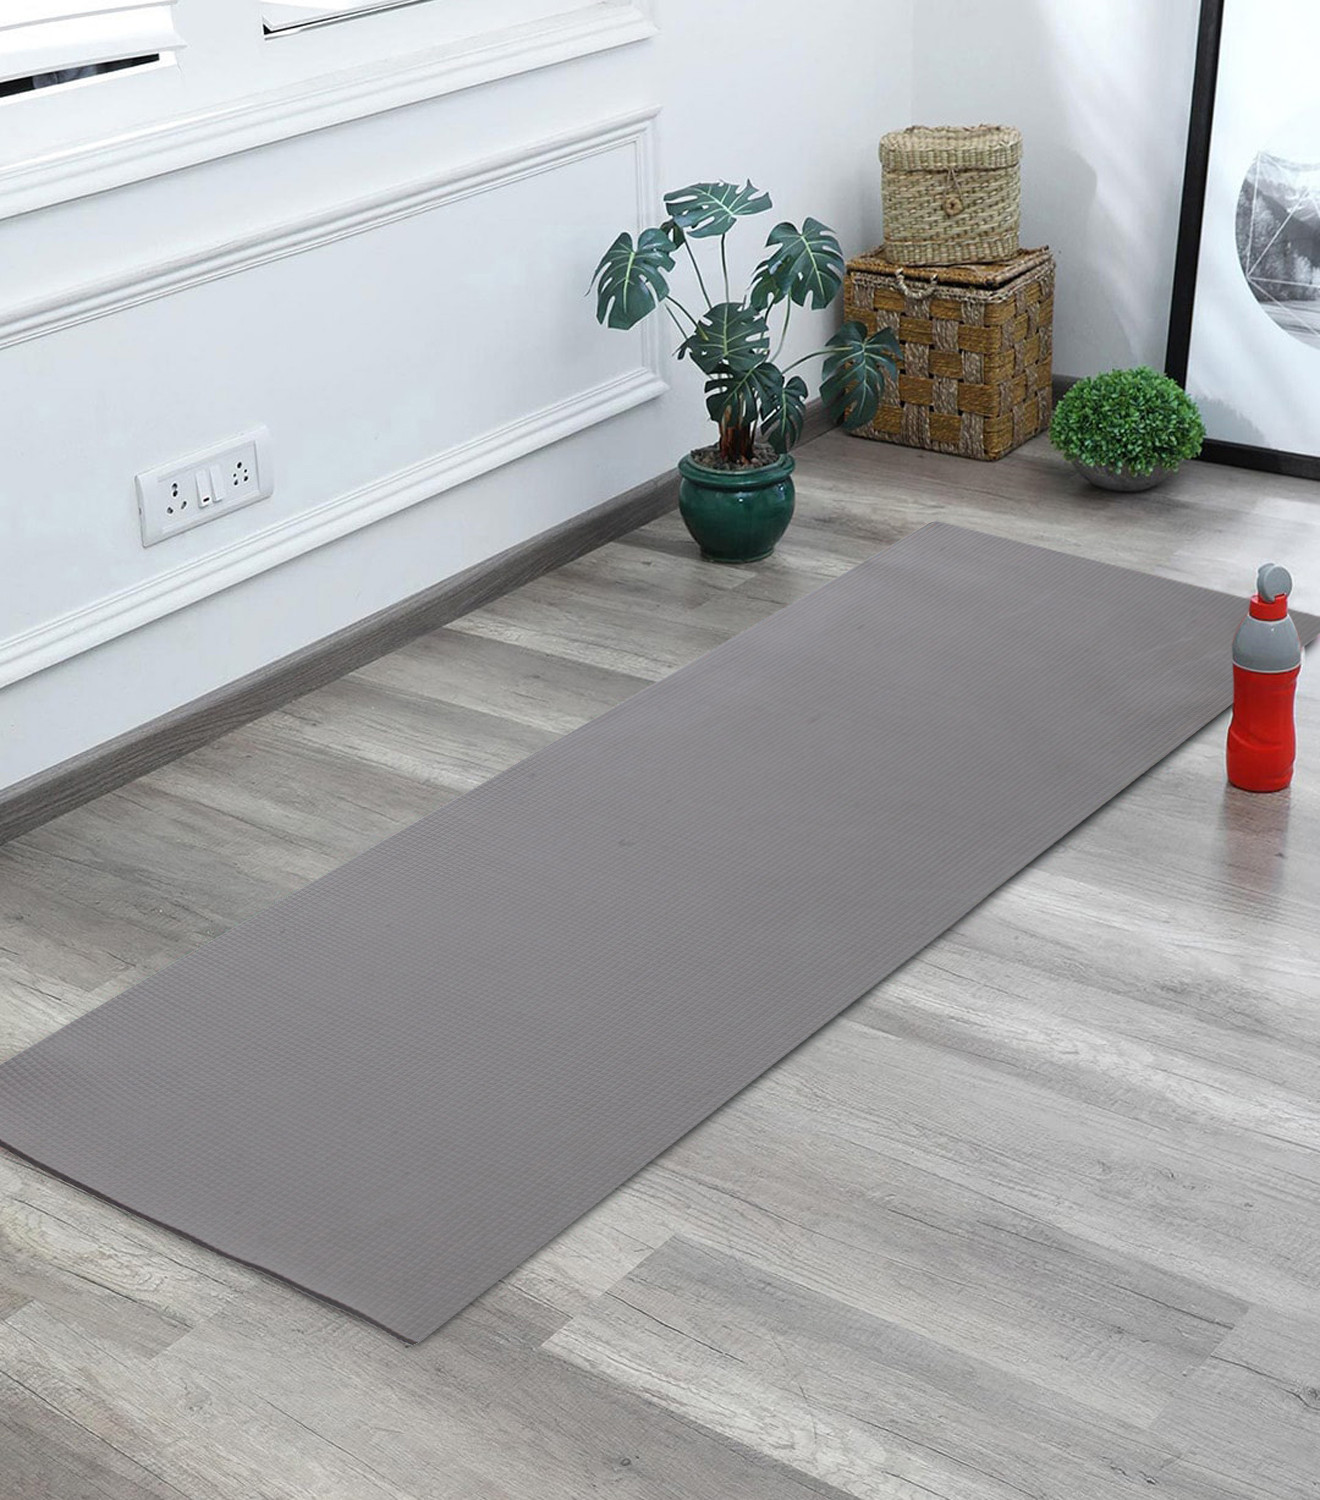 Kuber Industries 6 MM Extra Thick Yoga mat for Gym Workout and Flooring Exercise Long Size Yoga Mat for Men and Women, 6 x 2 Feet (Grey)-33_S_KUBQMART11590